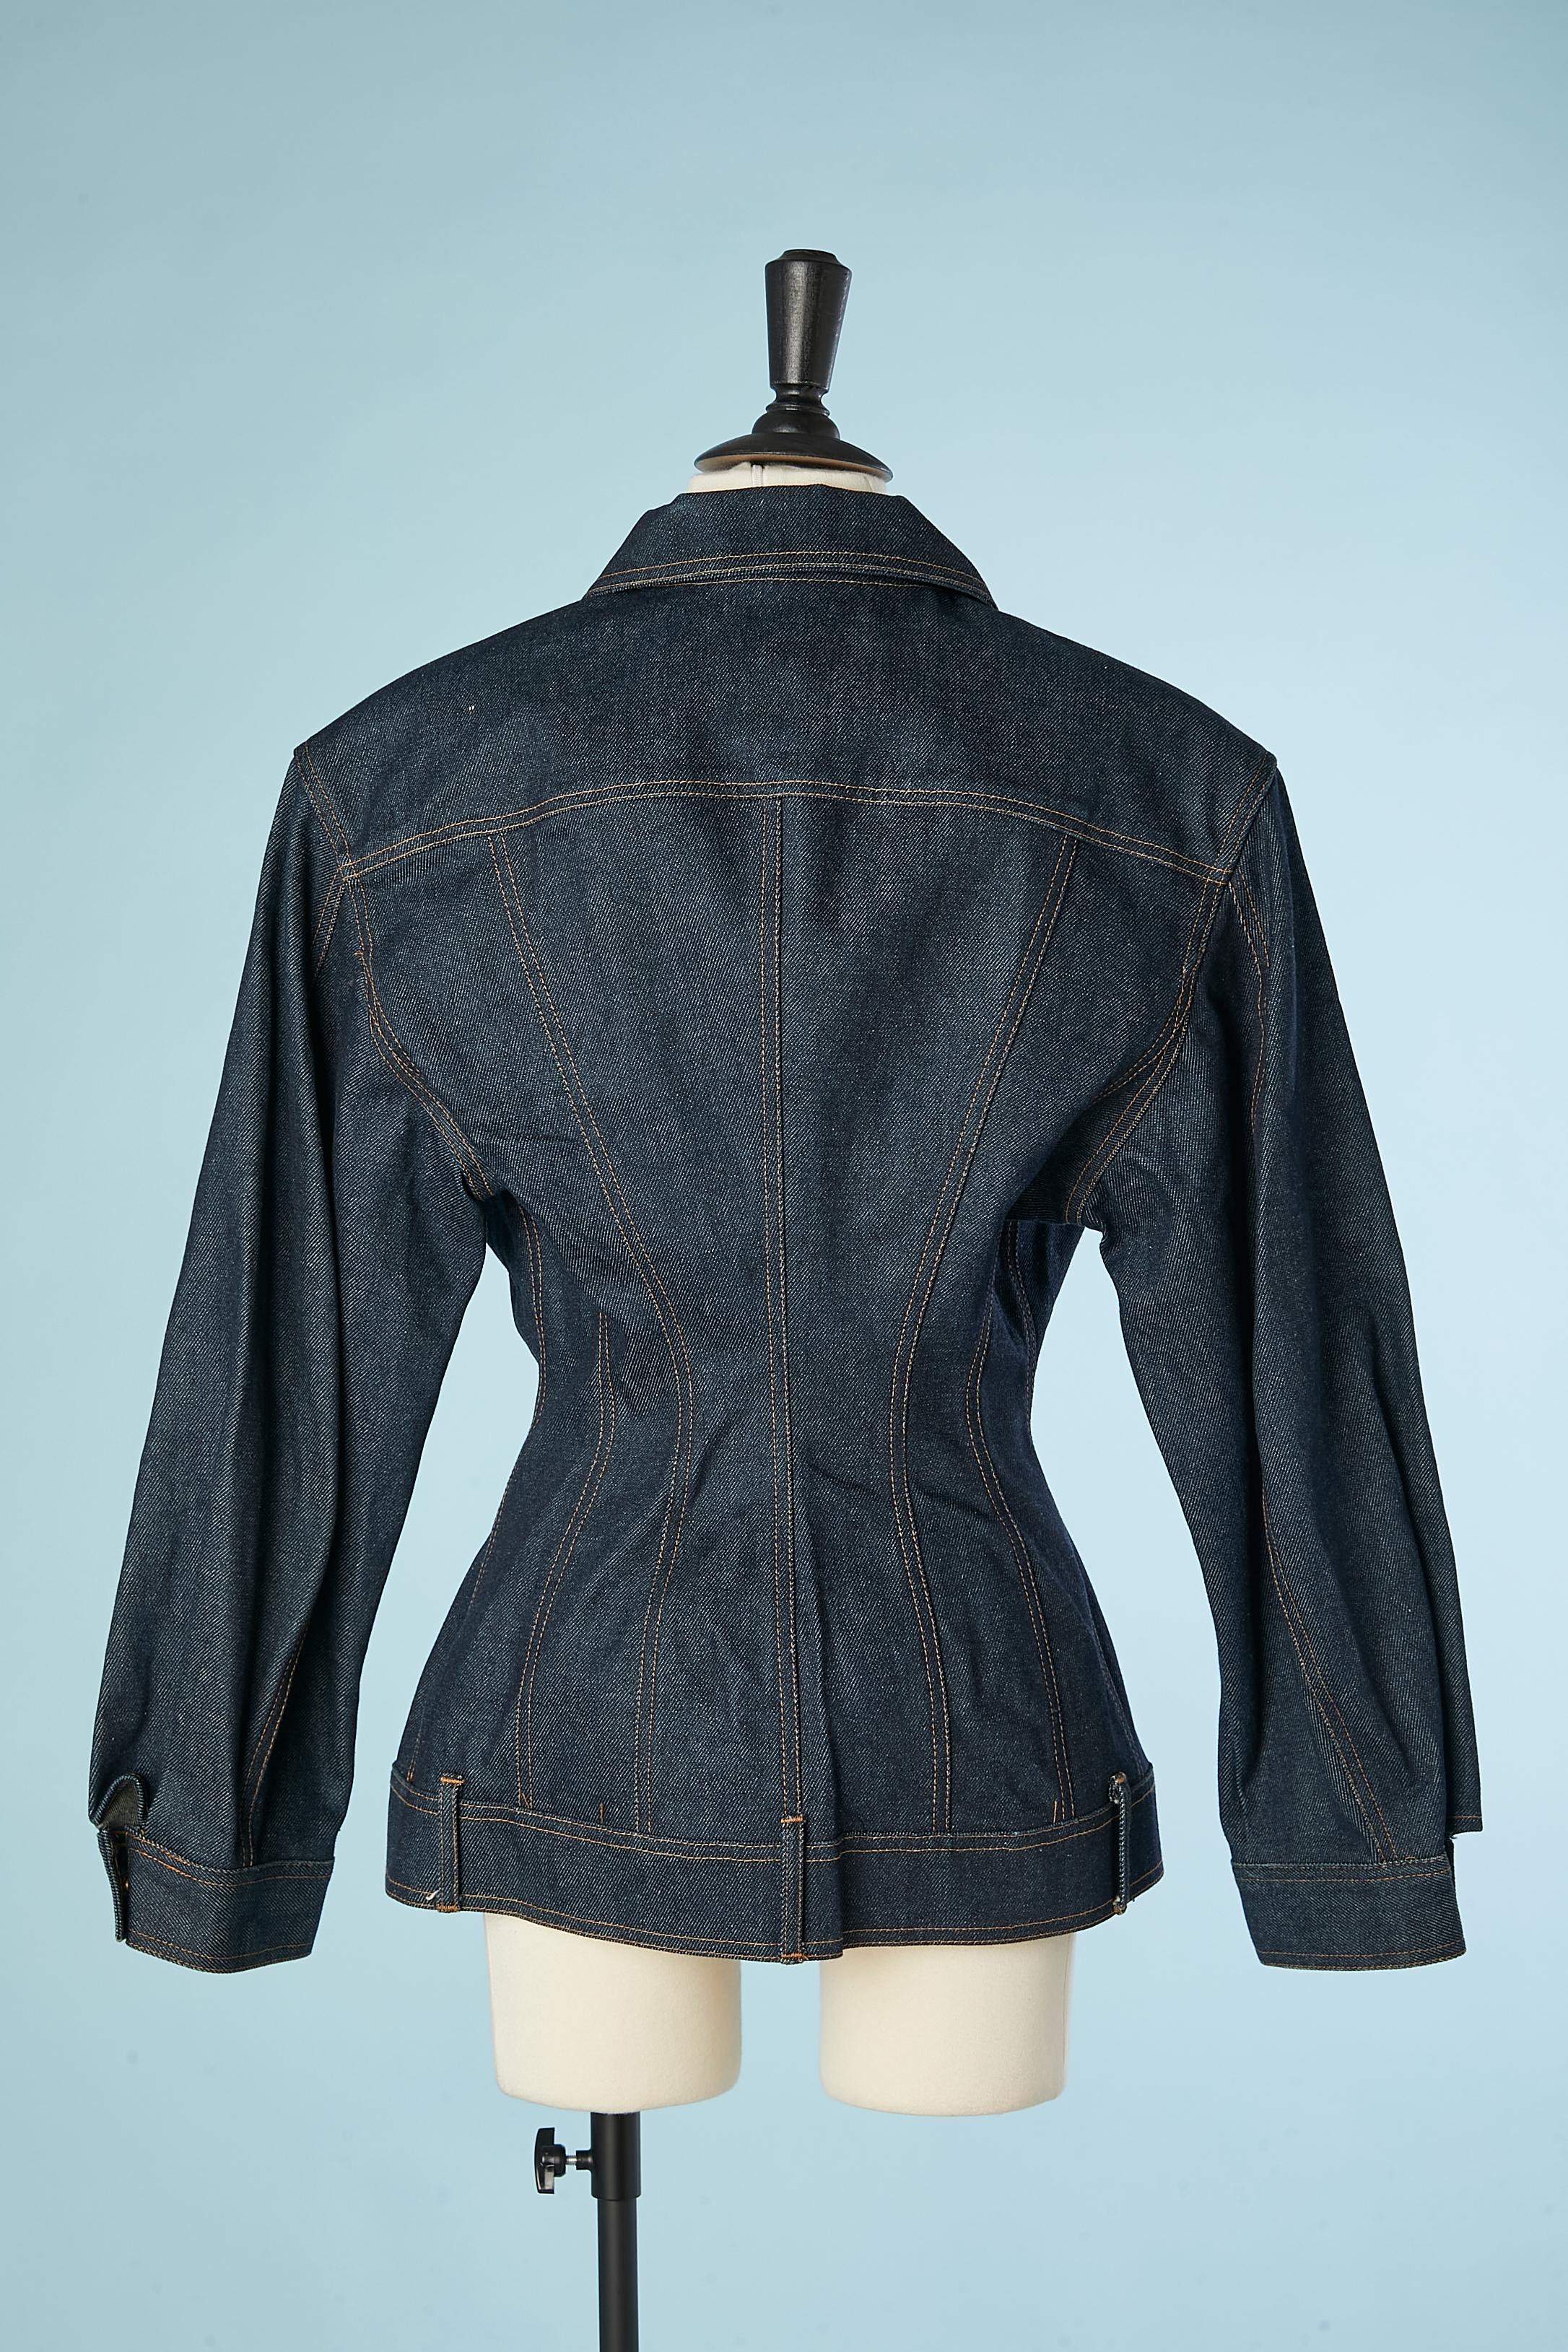 Denim jacket with fitted waist and curved hips Junior Gaultier  2